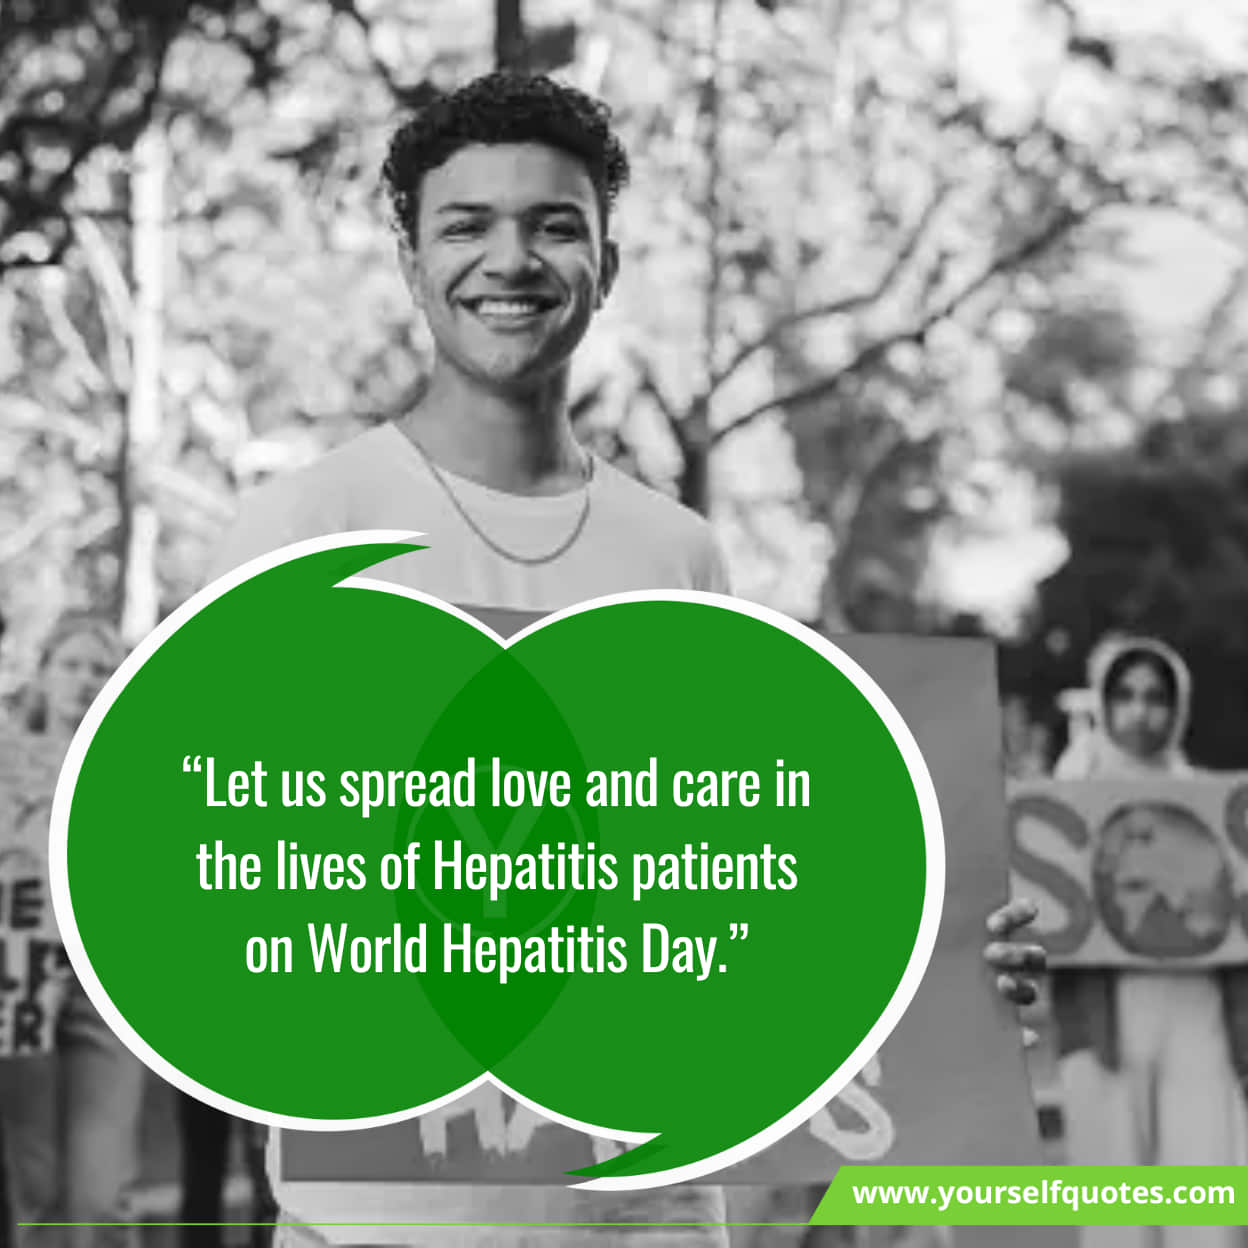 Messages of support for Hepatitis survivors and their families